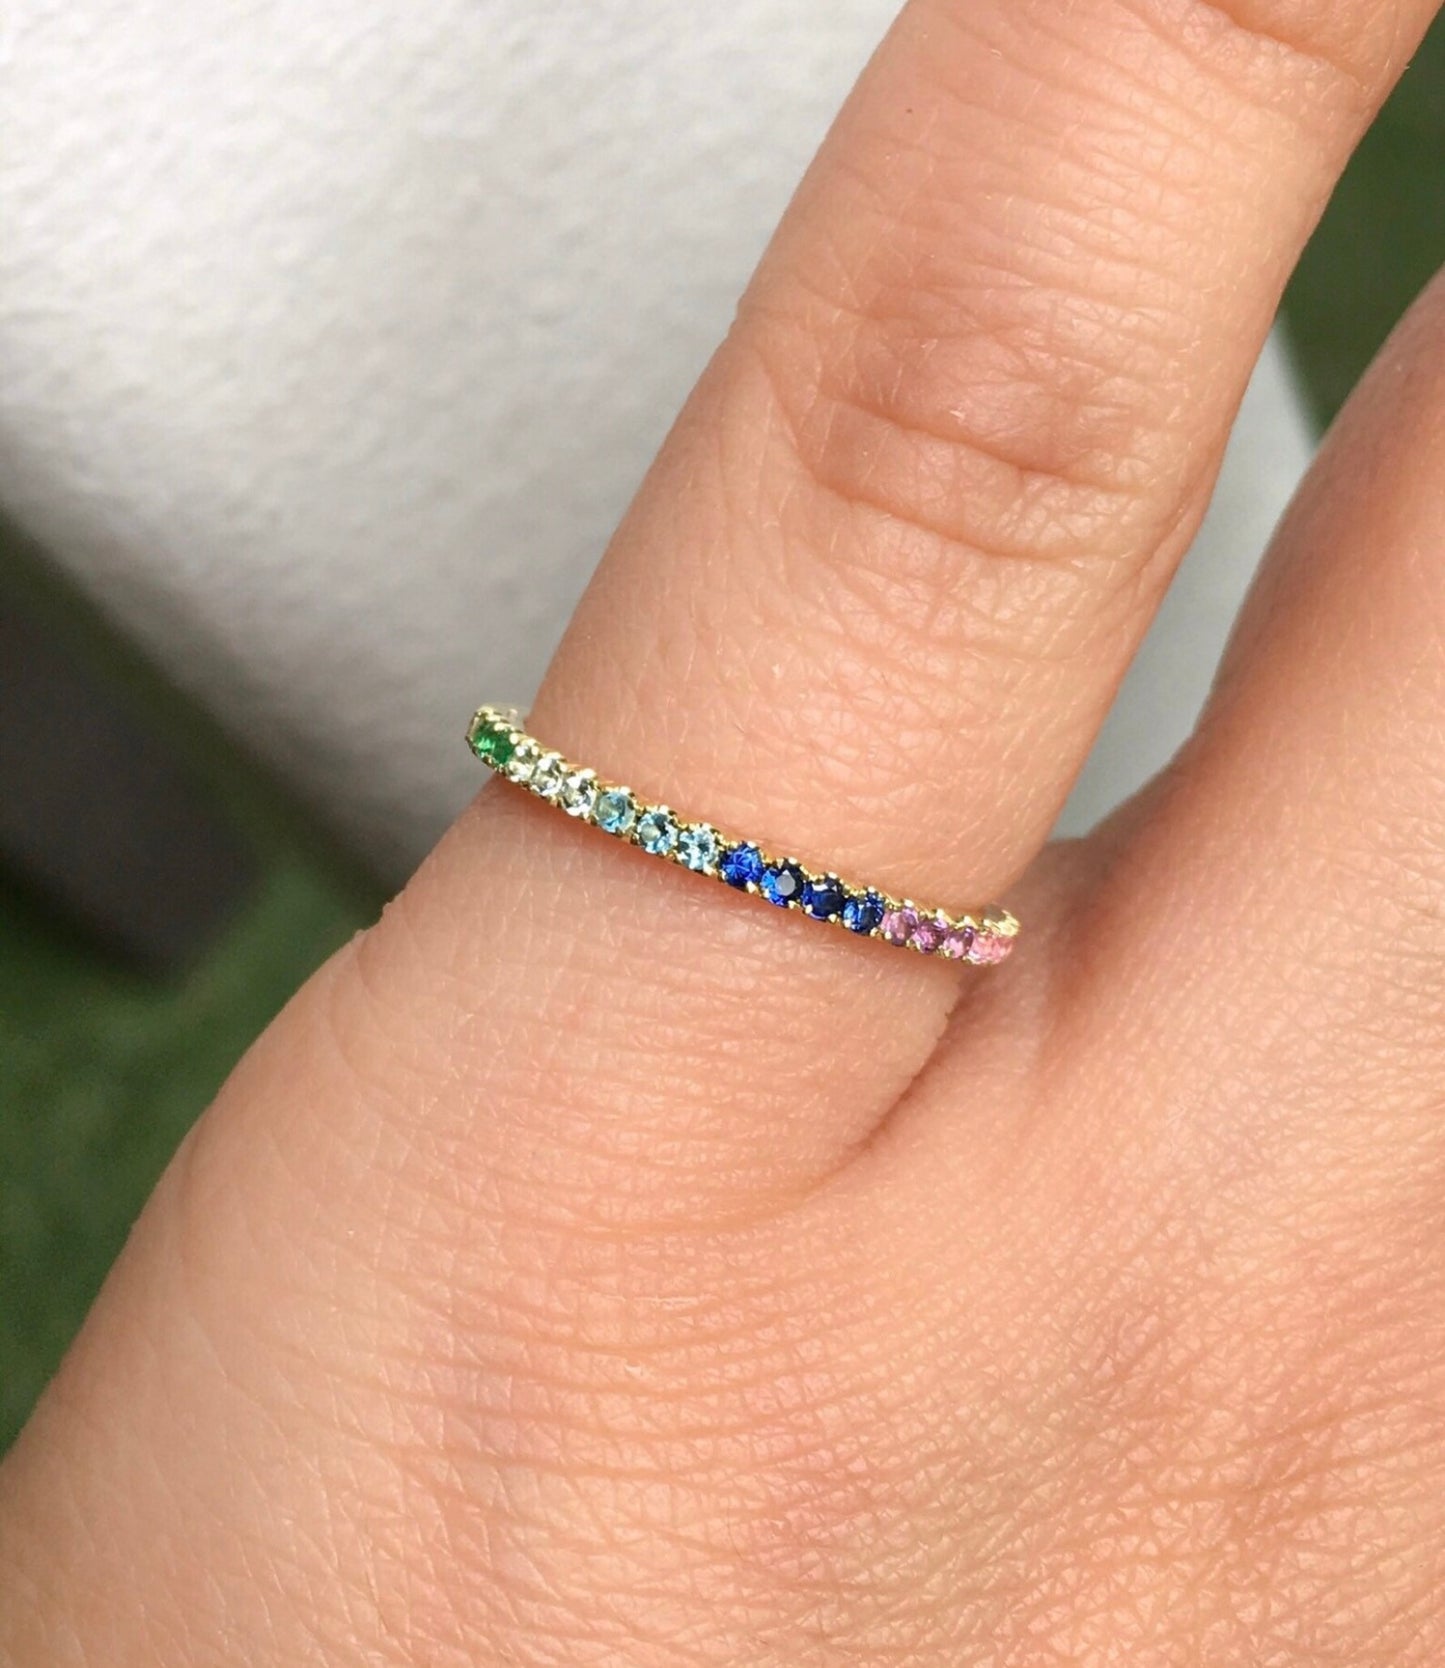 Rainbow Pave Band/ 1.5mm Multicolor Pave Half Eternity Ring/ Colorful Gemstone Stacking Ring/ Rainbow Wedding Band/ Anniversary Stack Ring